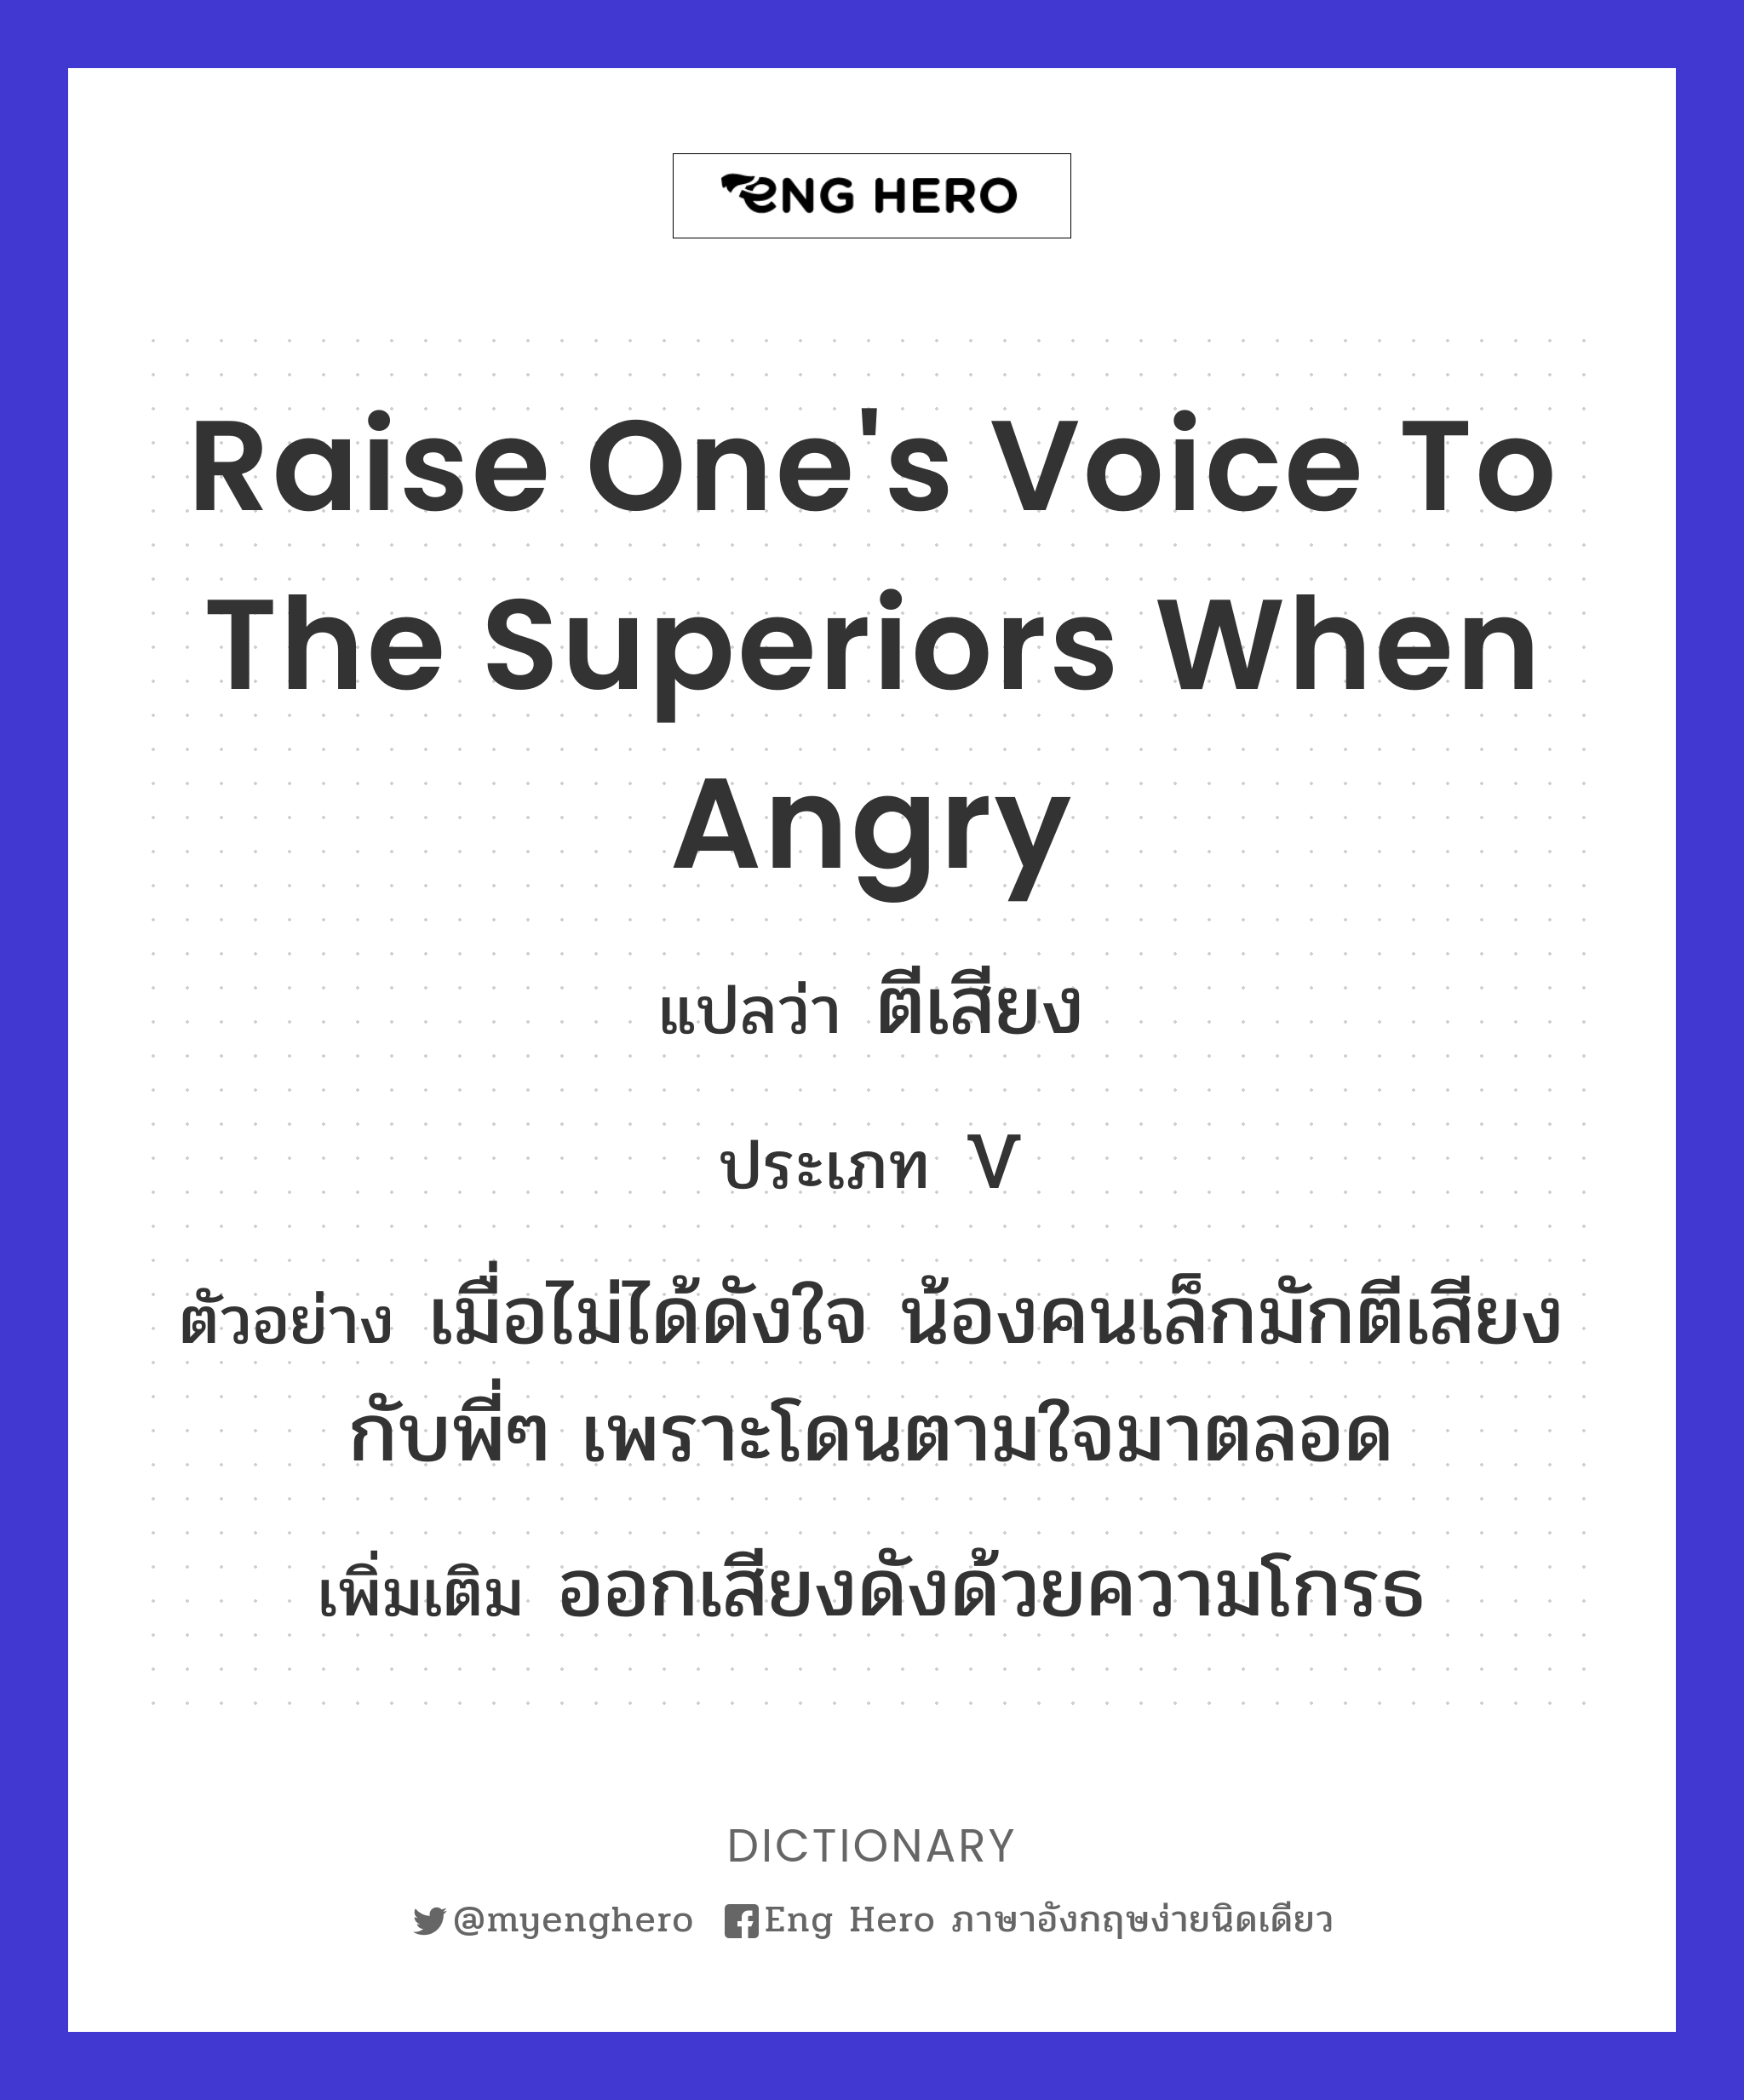 raise one's voice to the superiors when angry